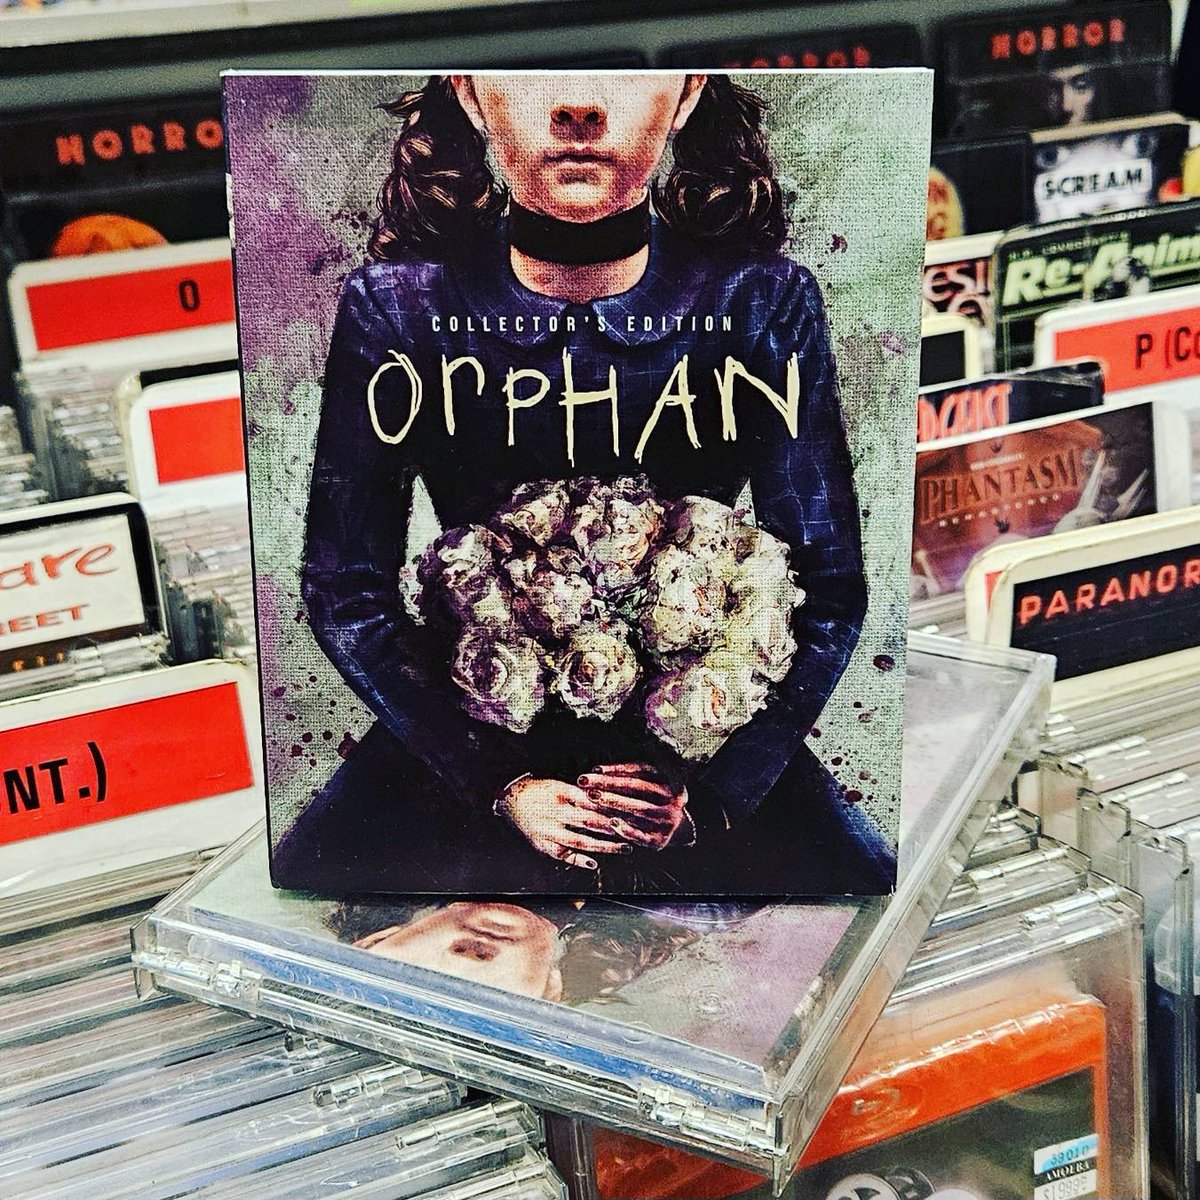 Jaume Collet-Serra's 2009 psychological horror film 'Orphan' is out now on Collector's Edition Blu-ray via @ShoutFactory! Get it here: bit.ly/3V4qvHe